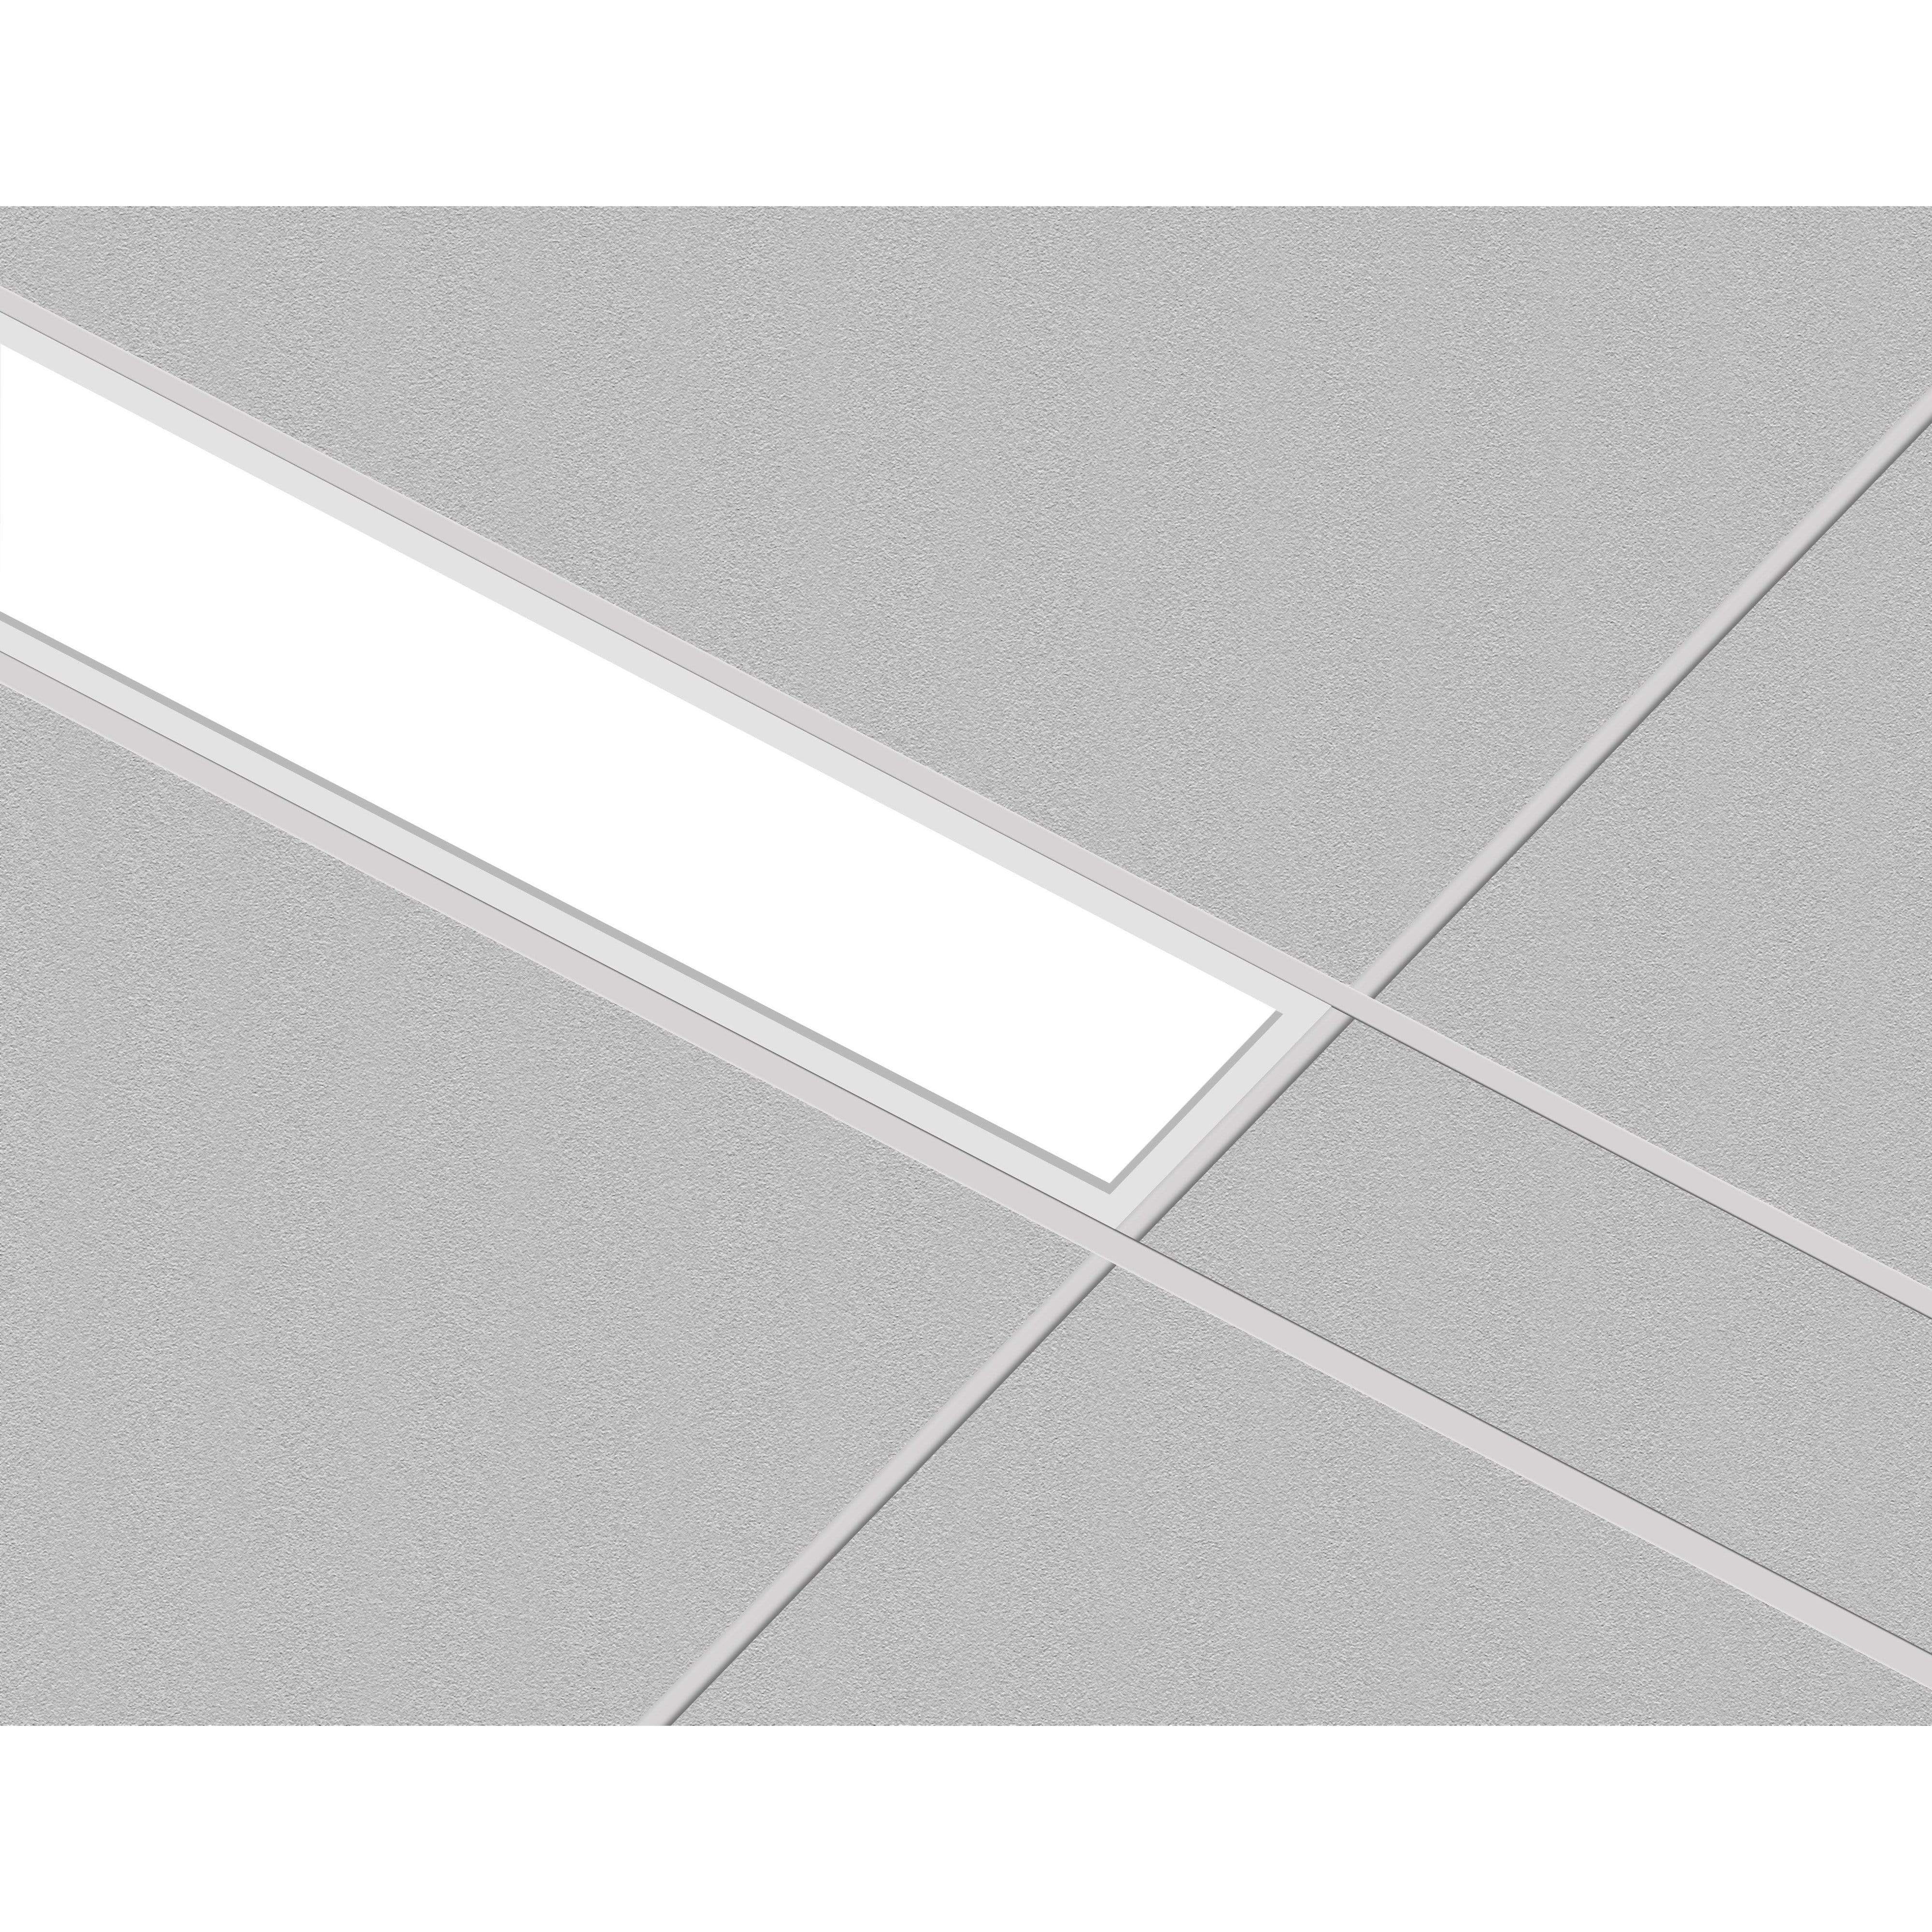 POE Texas Lighting Denton Linear Recessed PoE Lights - 4 in x 8 ft (Surface)